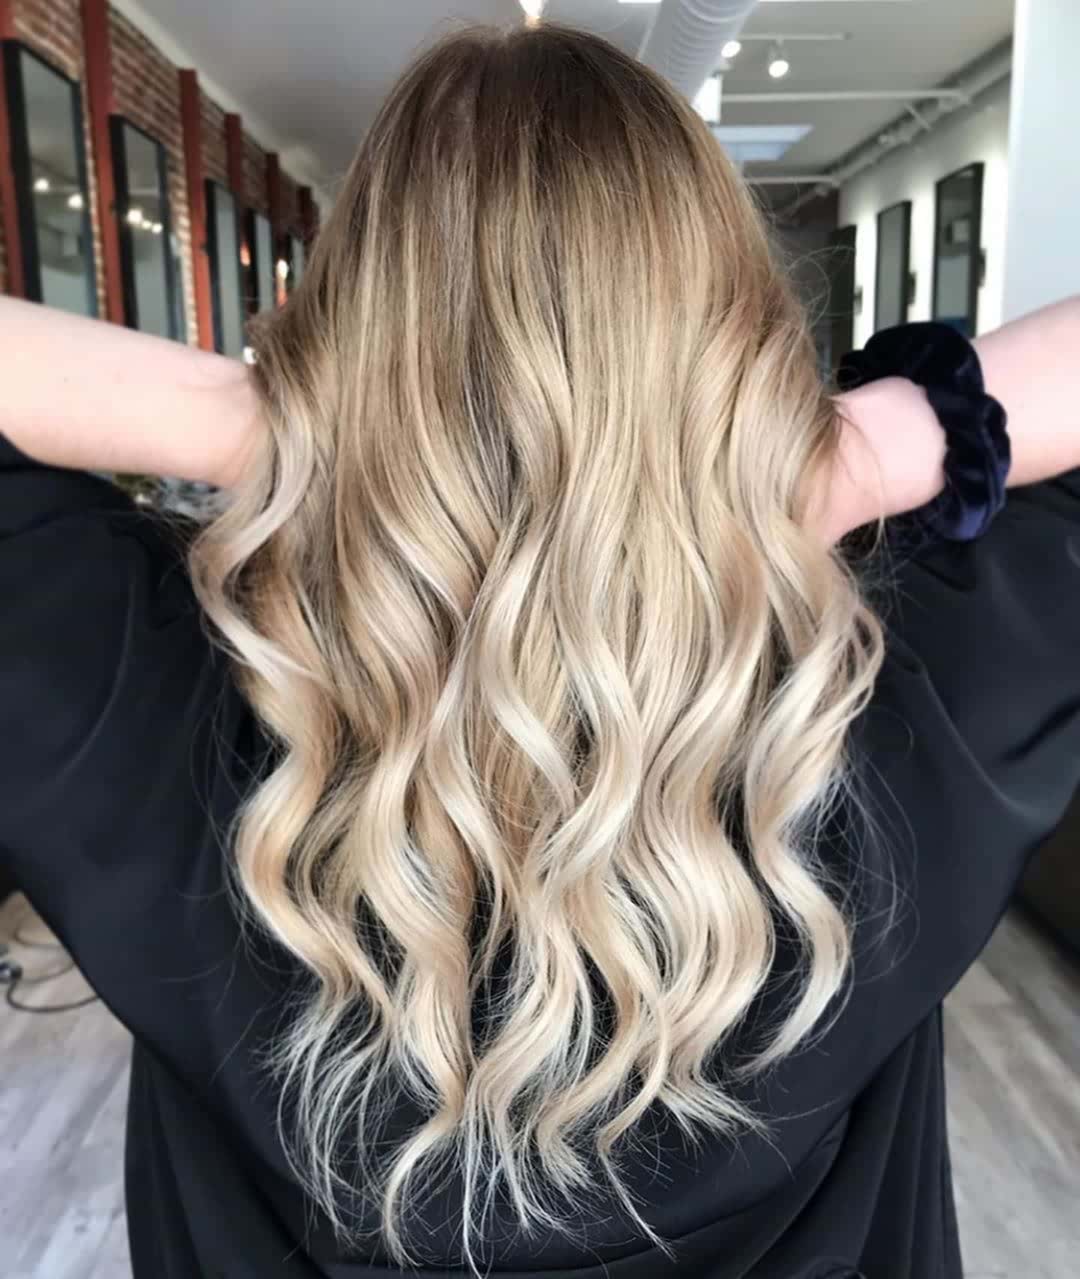 10 Best Beach Wave Hairstyles For Summer 2022 - Her Style Code